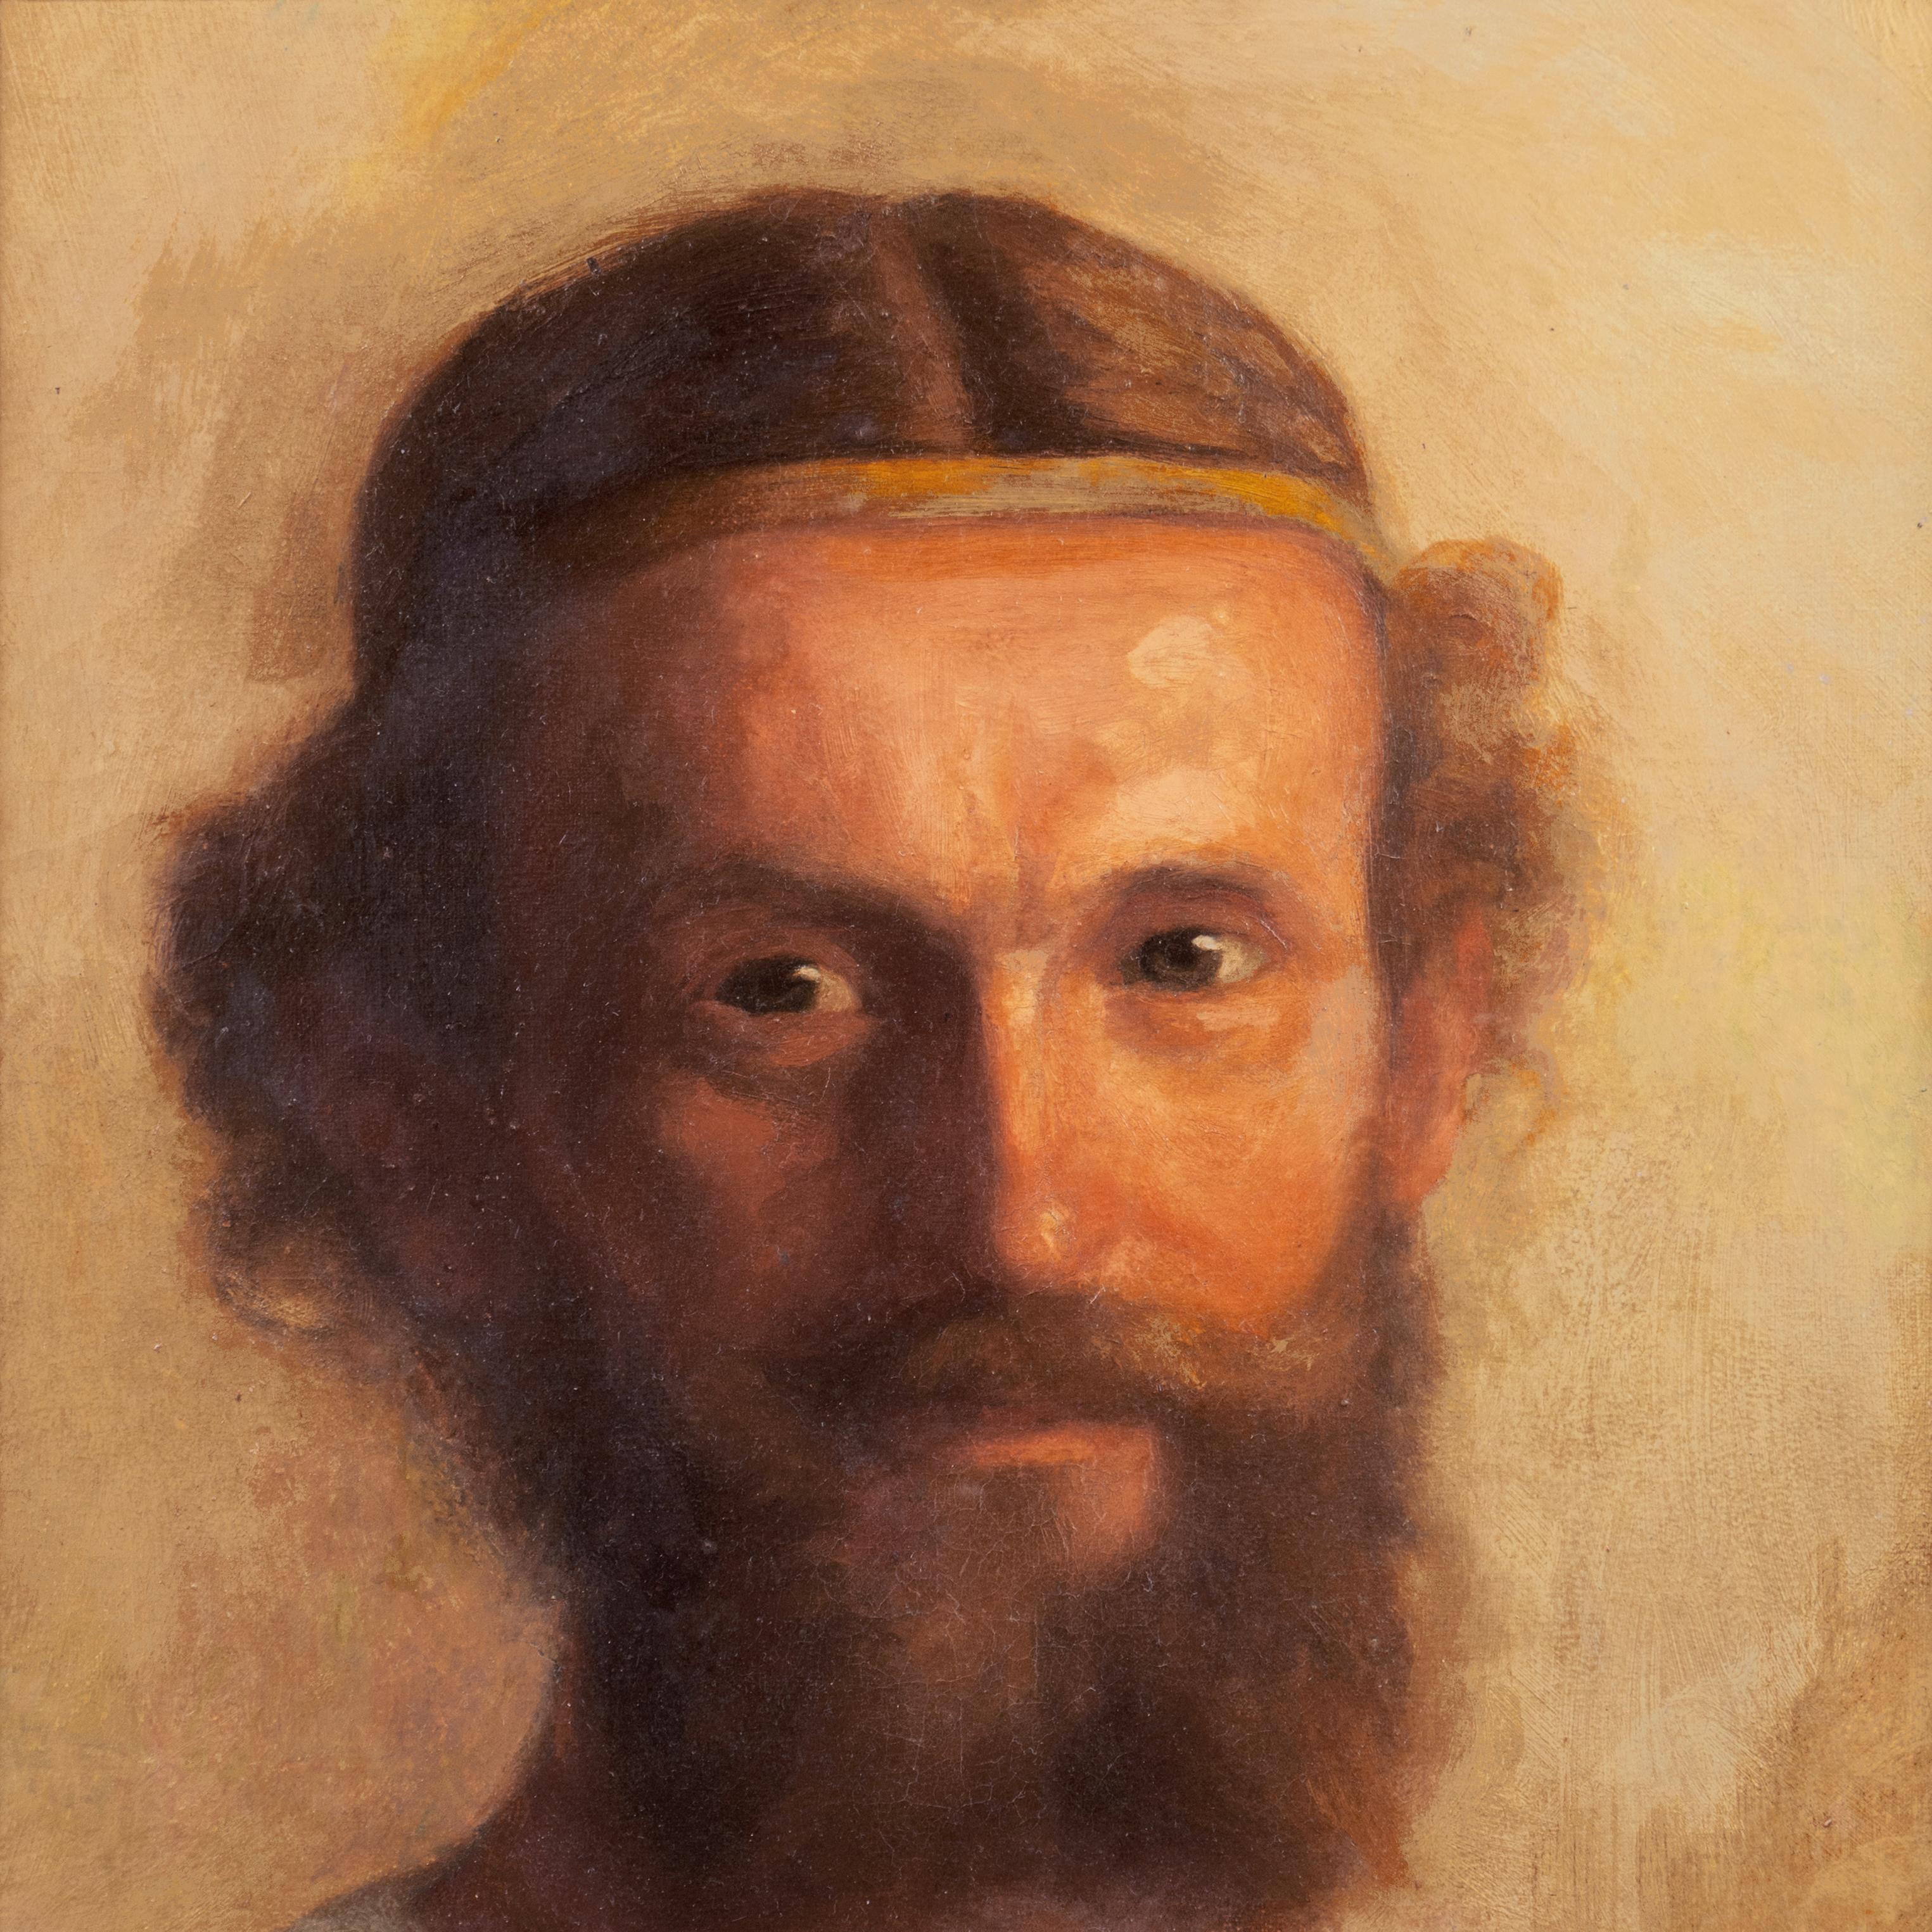 'Prophet', Chouinard Art Institute, Biblical, Old Testament, Early Christian - Brown Portrait Painting by Homer Williams